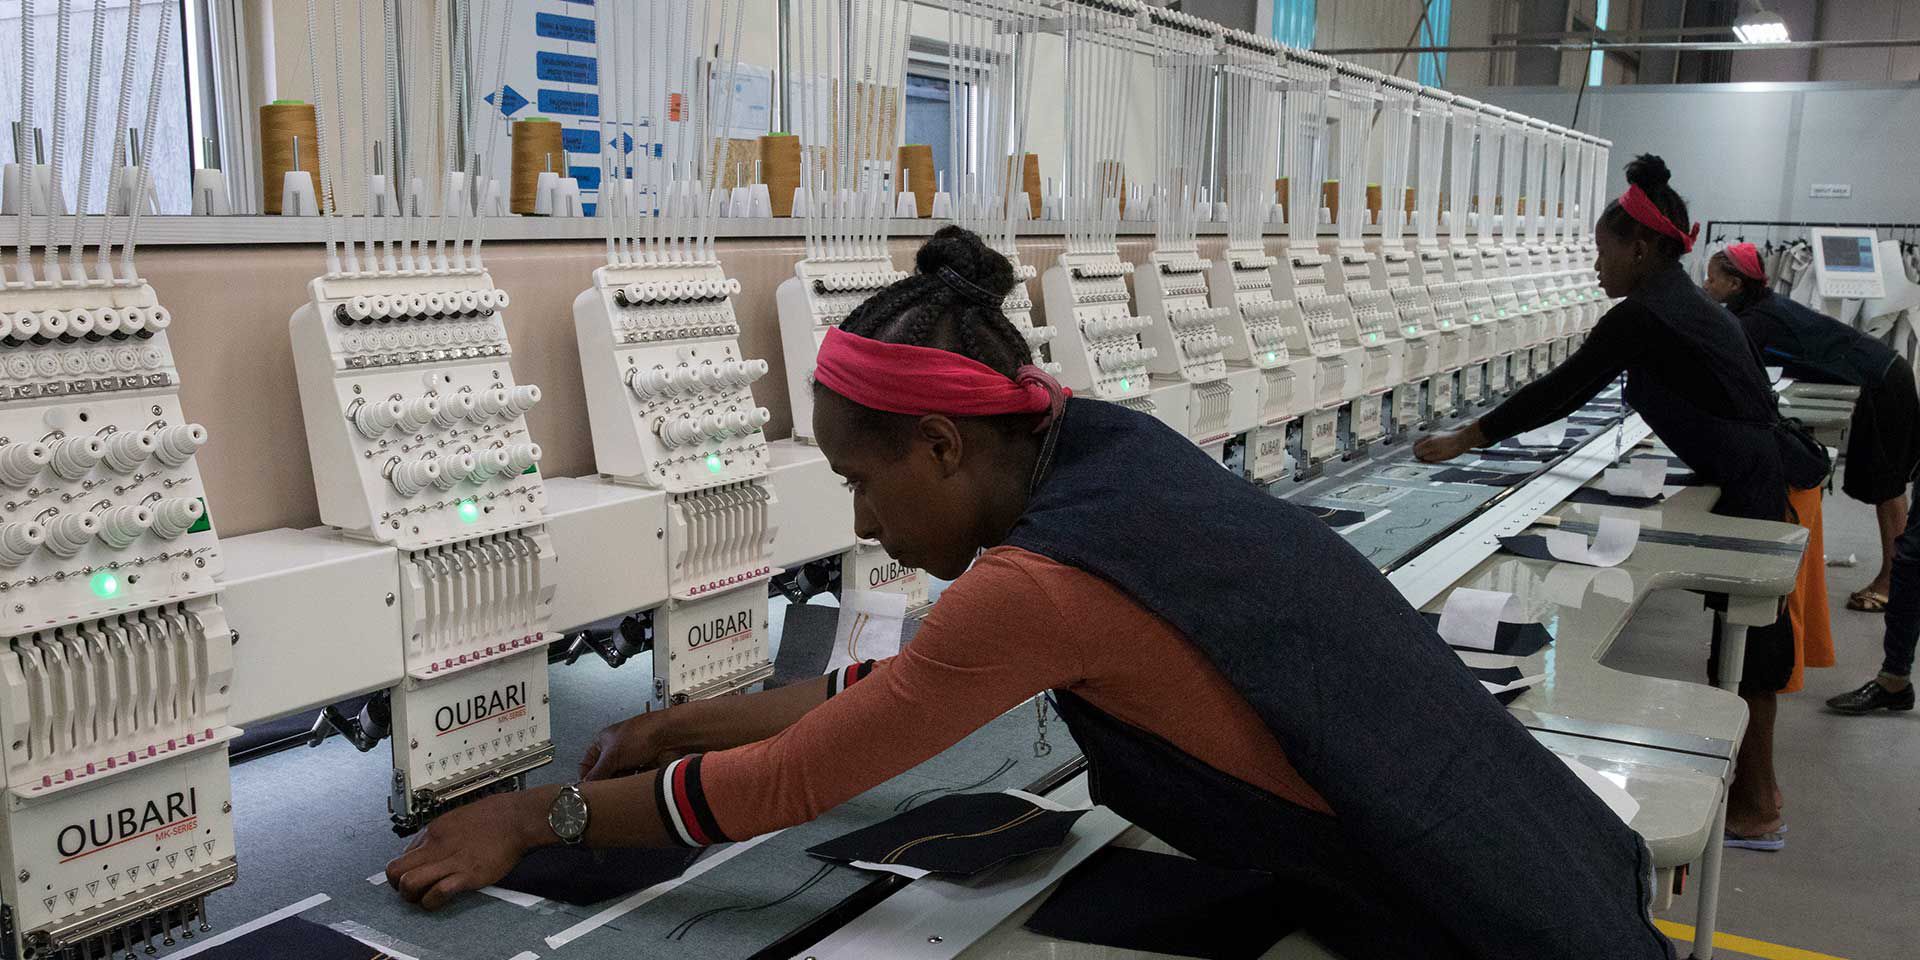 Employees of Indochine Apparel PLC working in the Hawassa Industrial Park, where more than 20 global manufacturers produce textiles and appeal, in Hawassa, Ethiopia on December 15, 2018. Photo © Dominic Chavez/International Finance Corporation\r